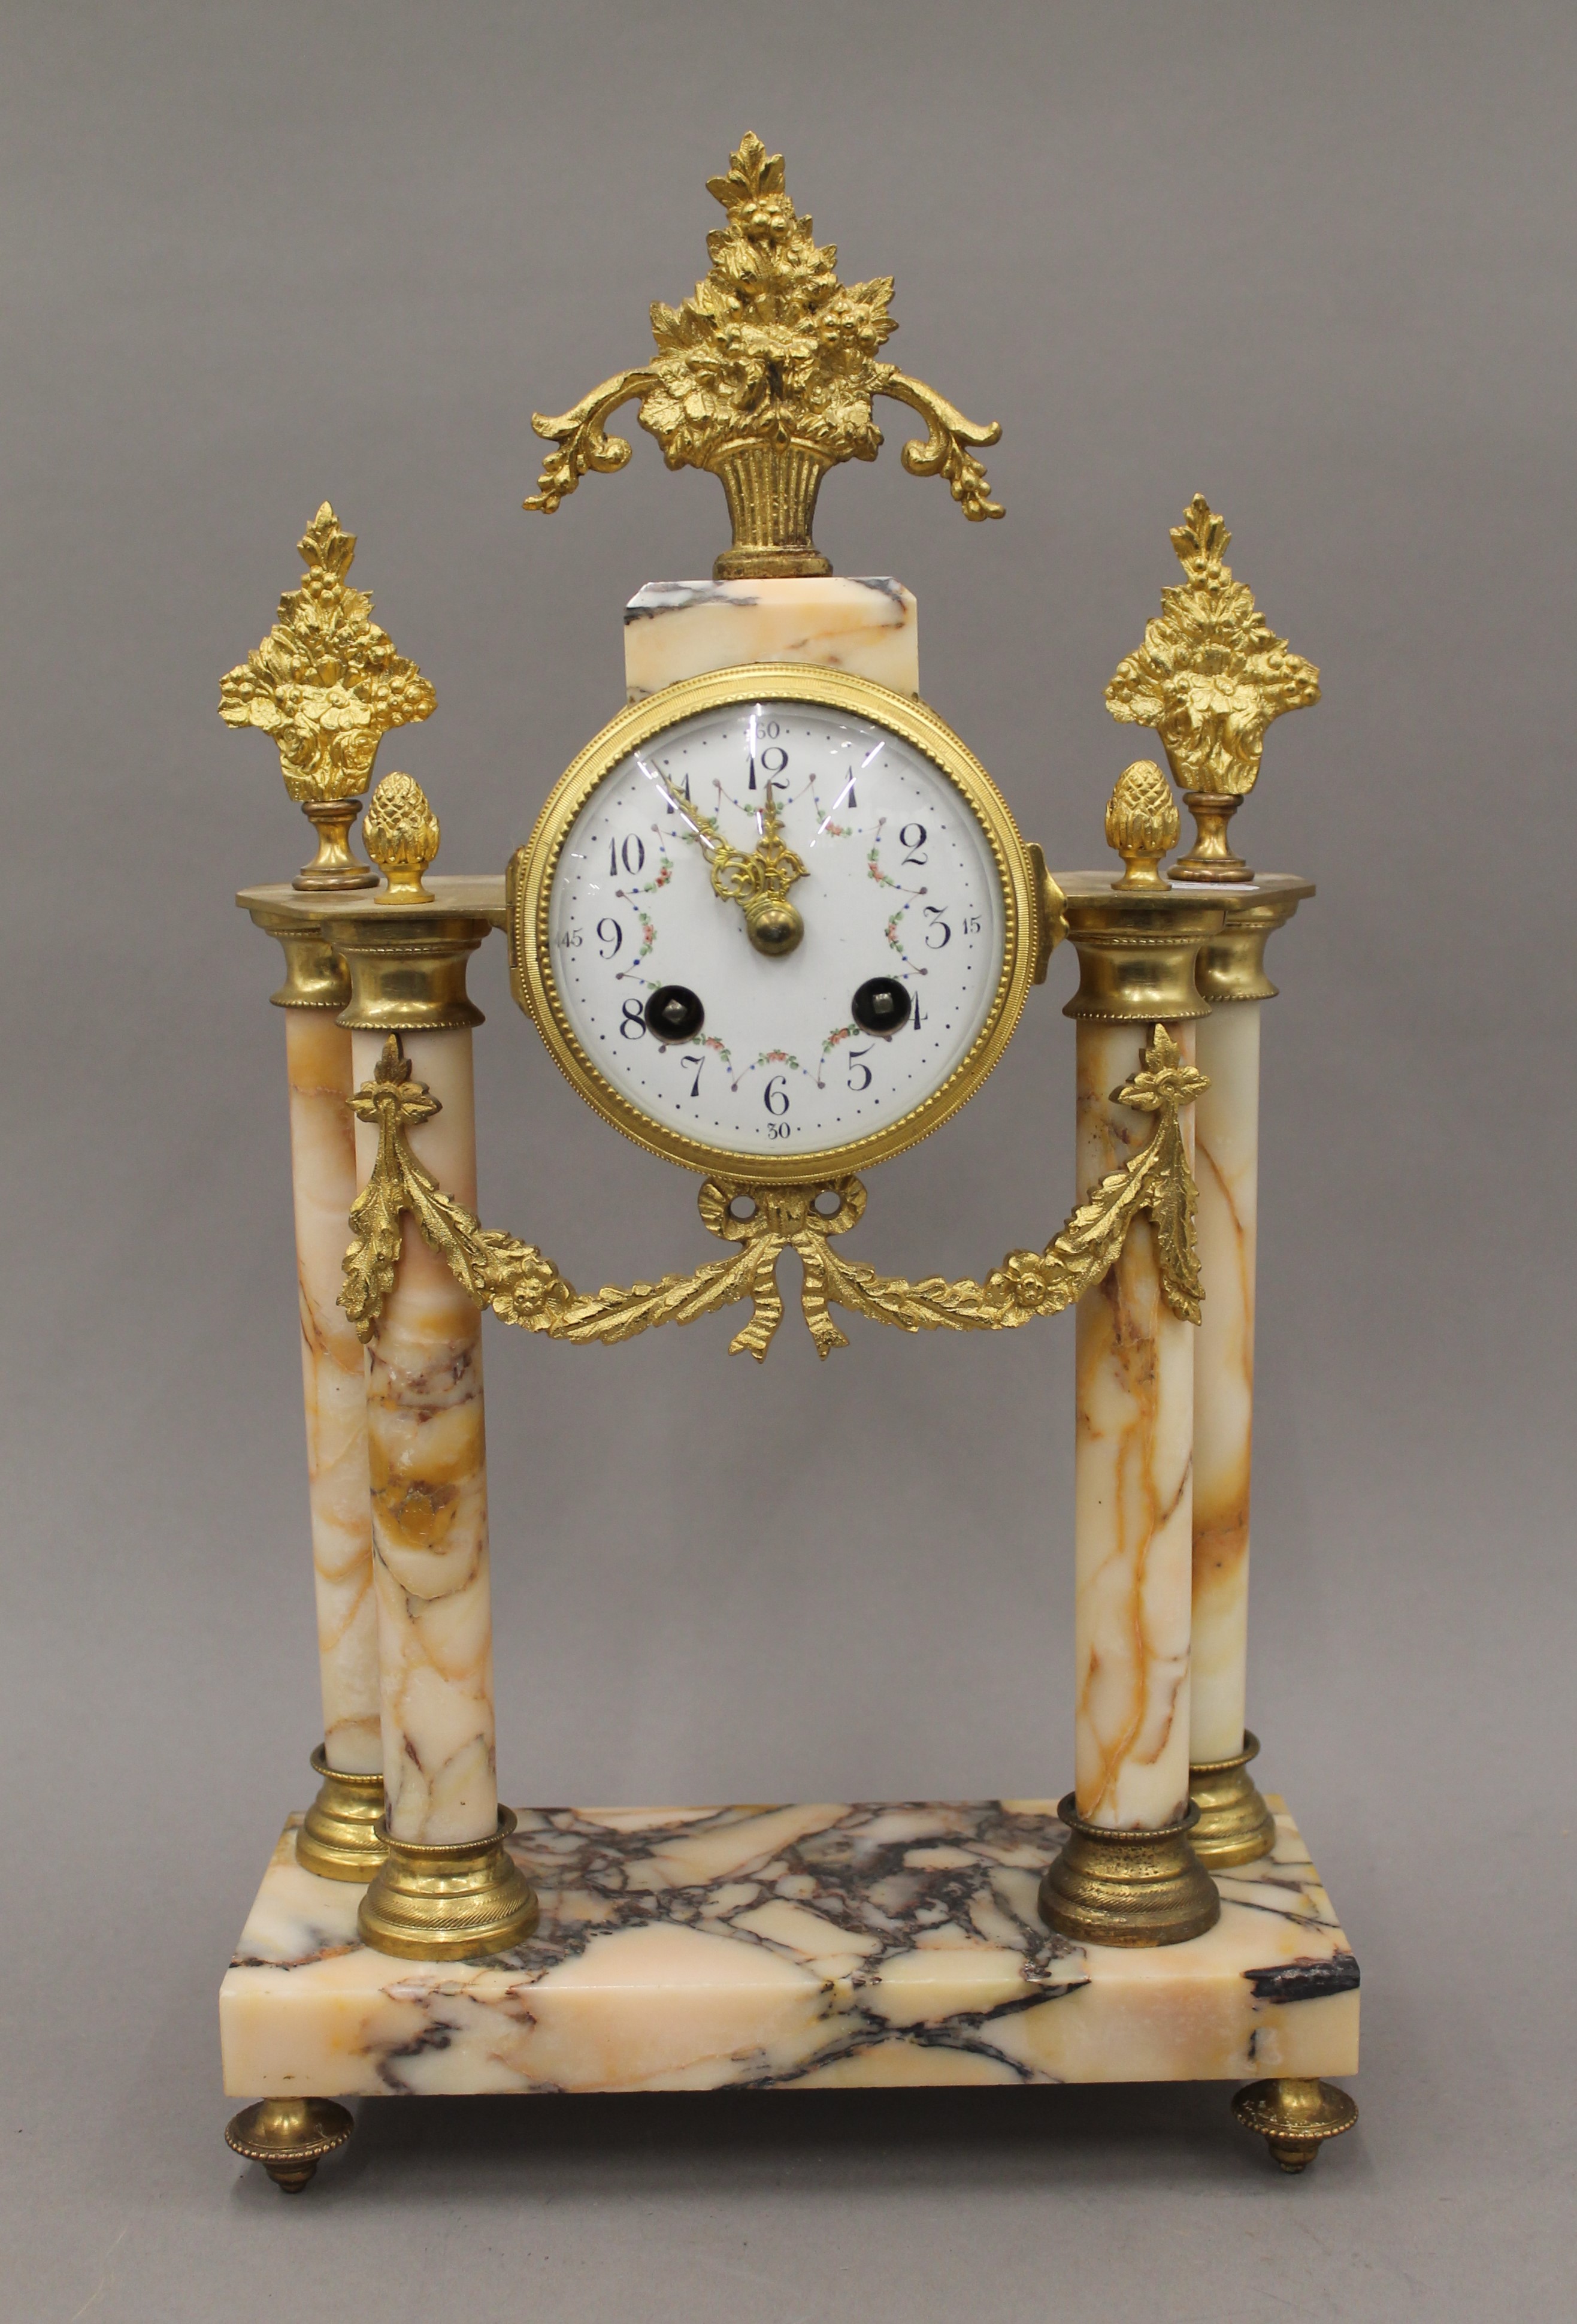 A marble and ormolu clock garniture with pendulum and key, with enamel dial and striking movement. - Image 2 of 14